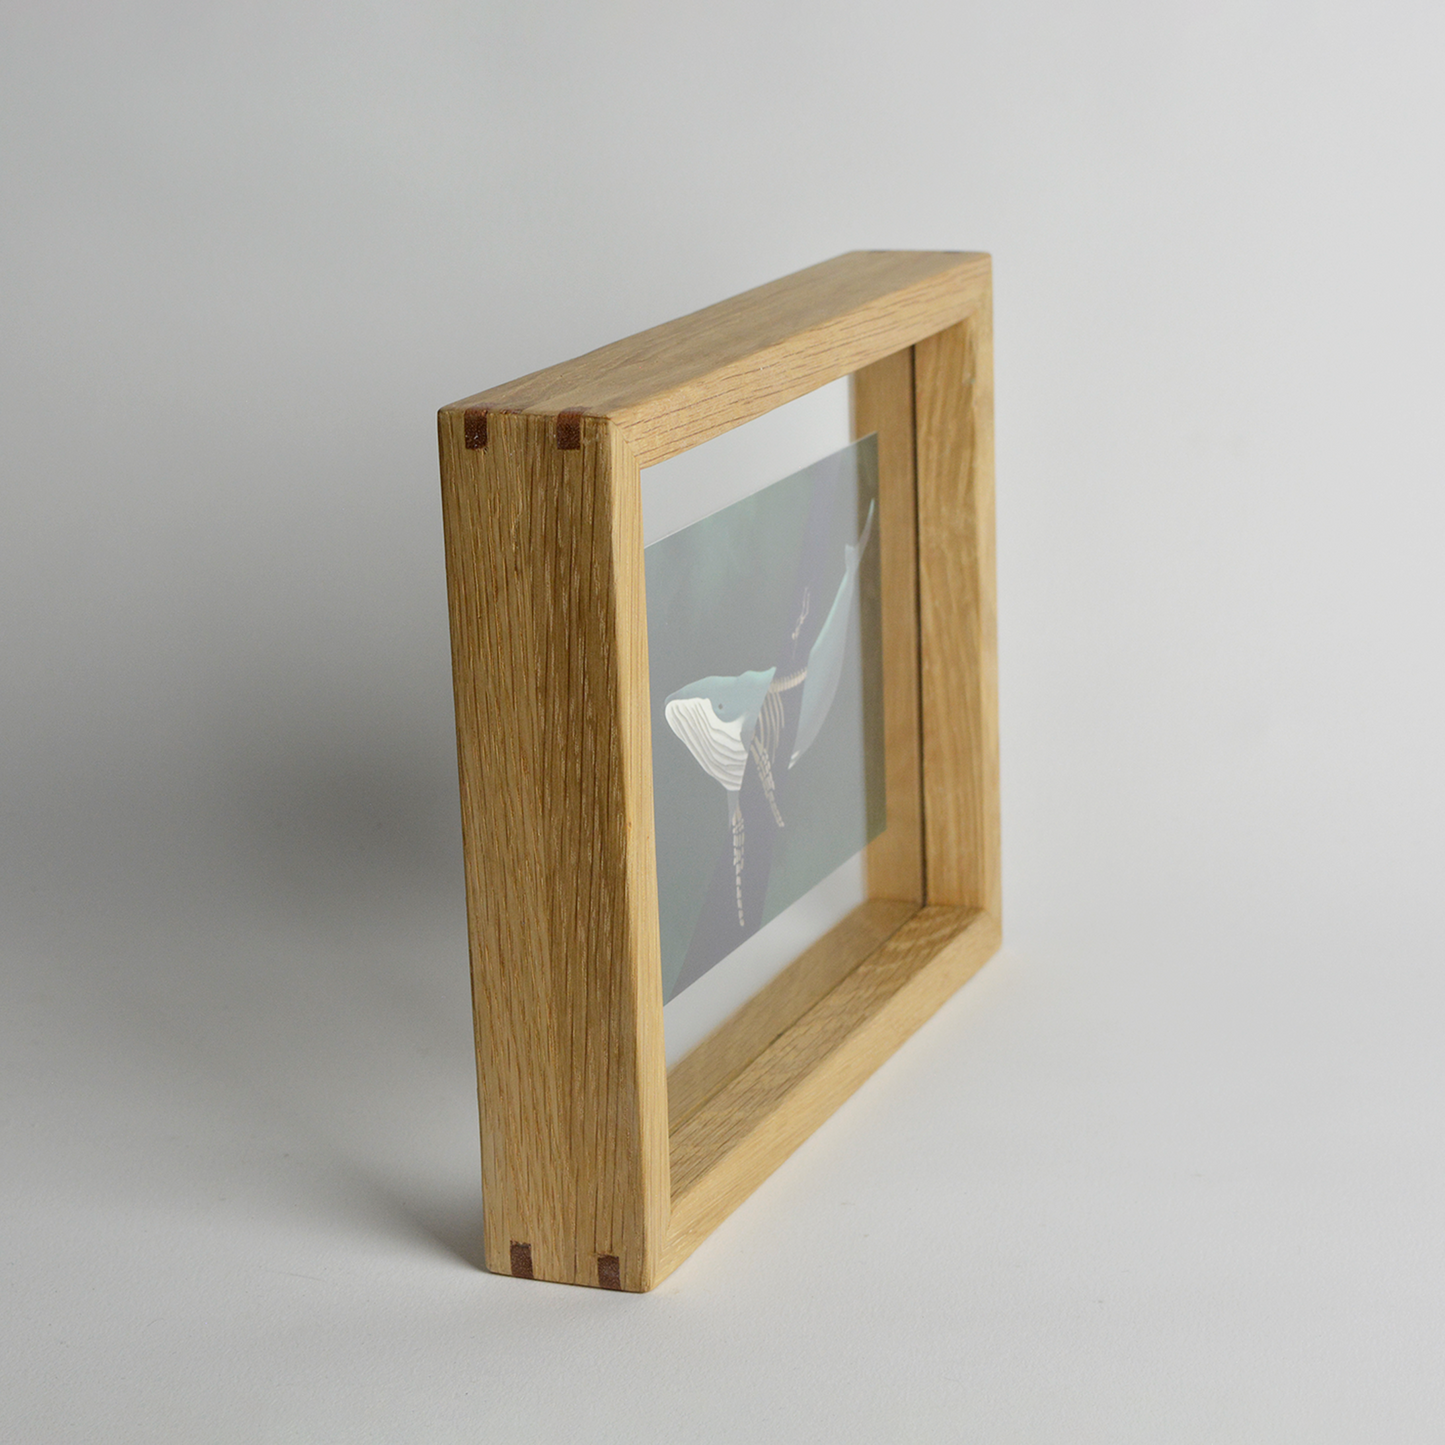 Floating A6 Picture Frame from recycled Oak and Glass - Thin frame - Handmade